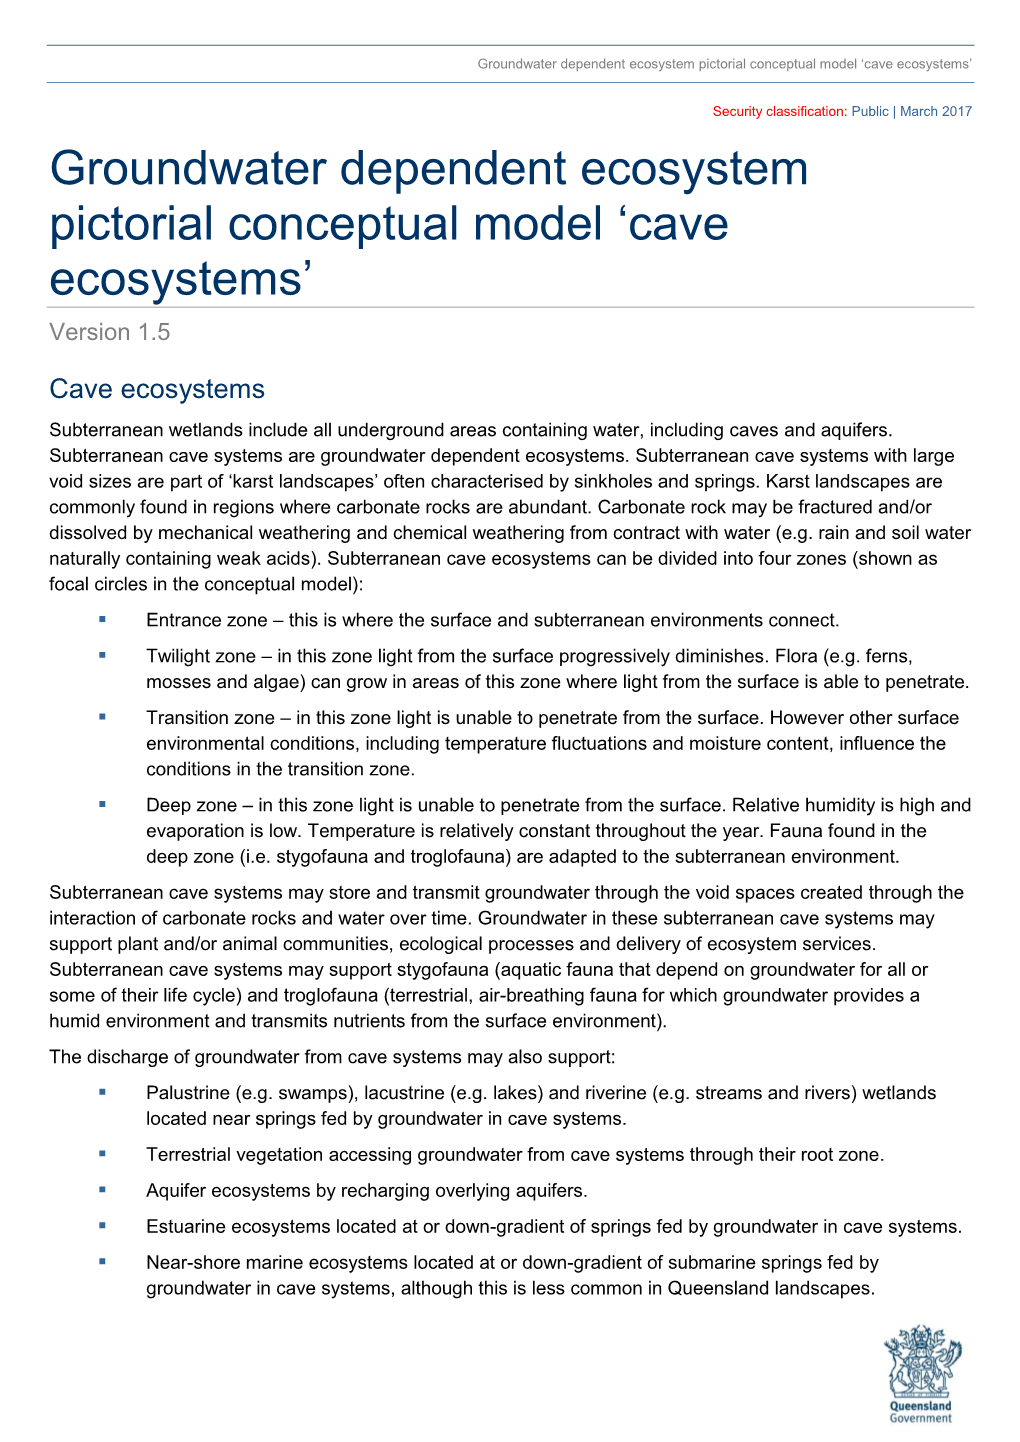 Groundwater Dependent Ecosystem Pictorial Conceptual Model 'Cave